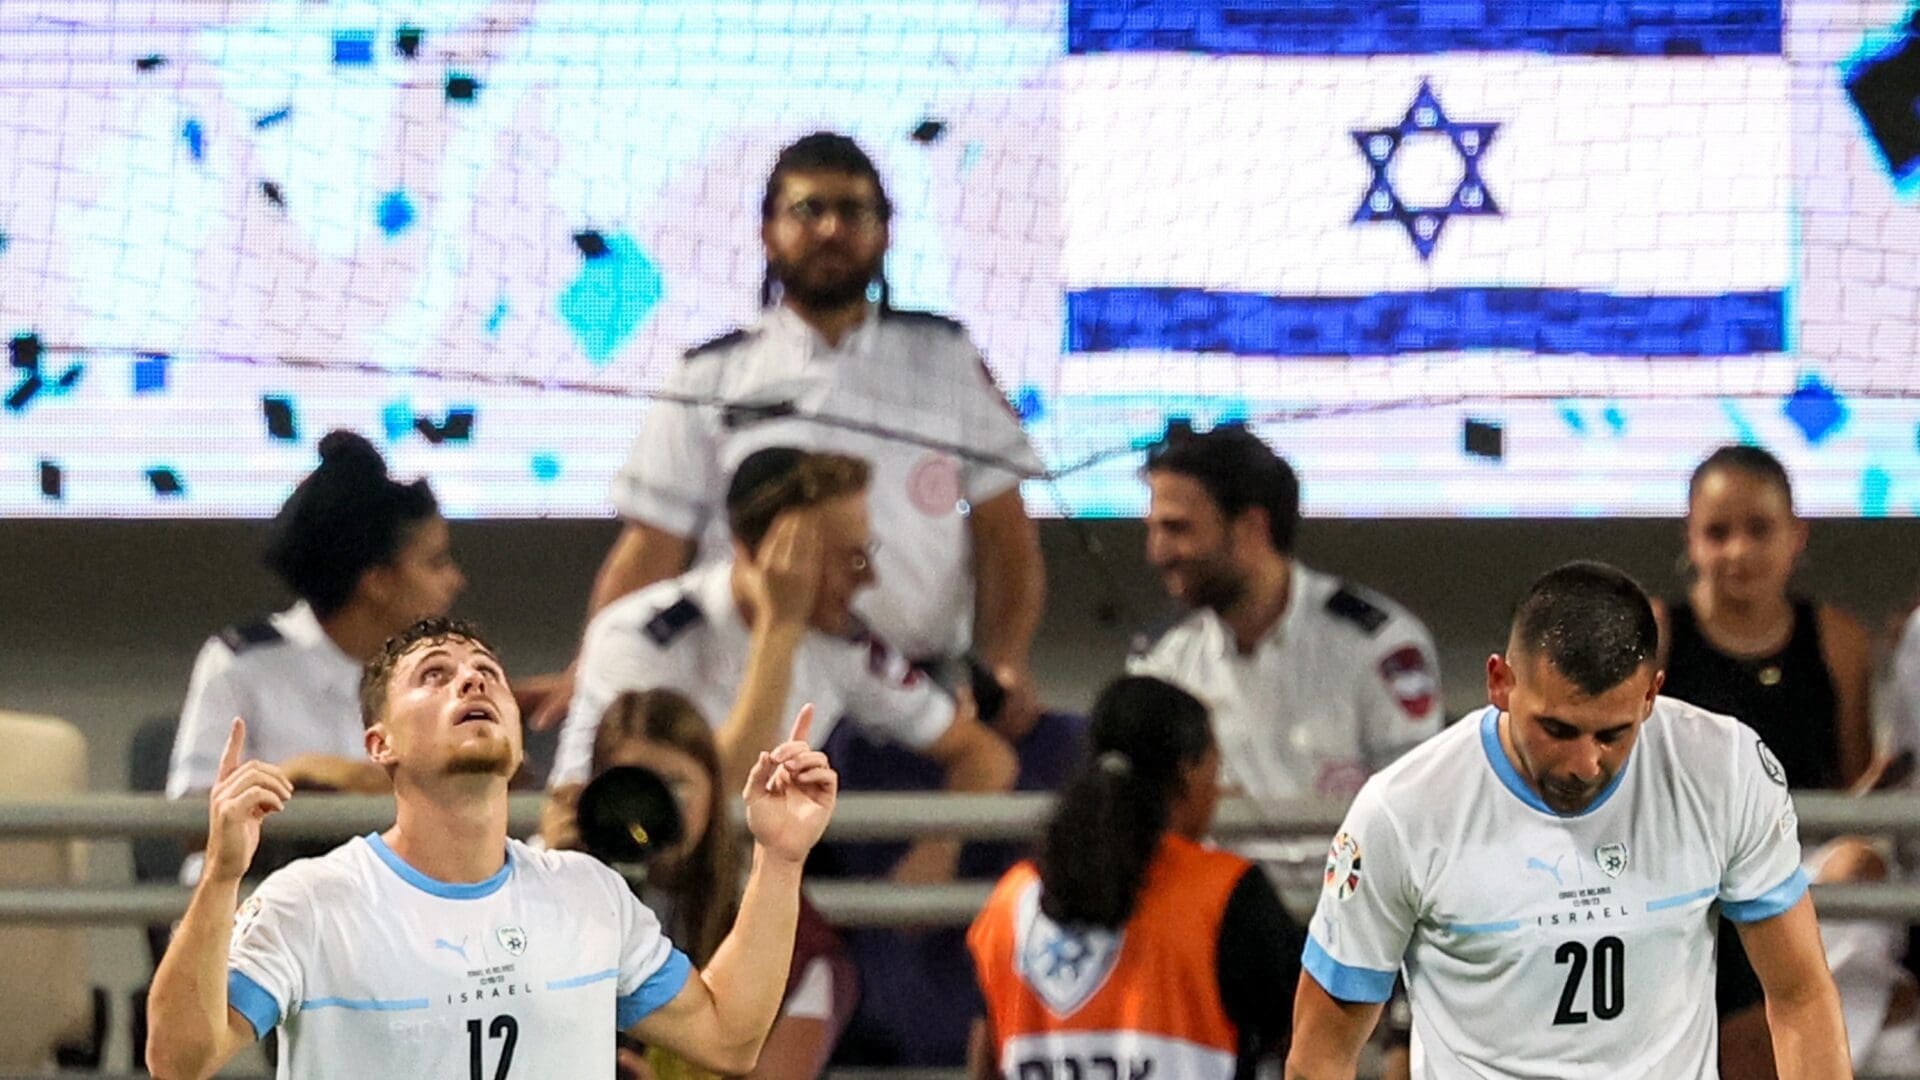 Israel's midfielder Gavriel Kanichowsky reacts after scoring a goal during the UEFA Euro 2024 group I qualification football match against Belarus at the Bloomfield stadium in Tel Aviv on 12 September 2023.